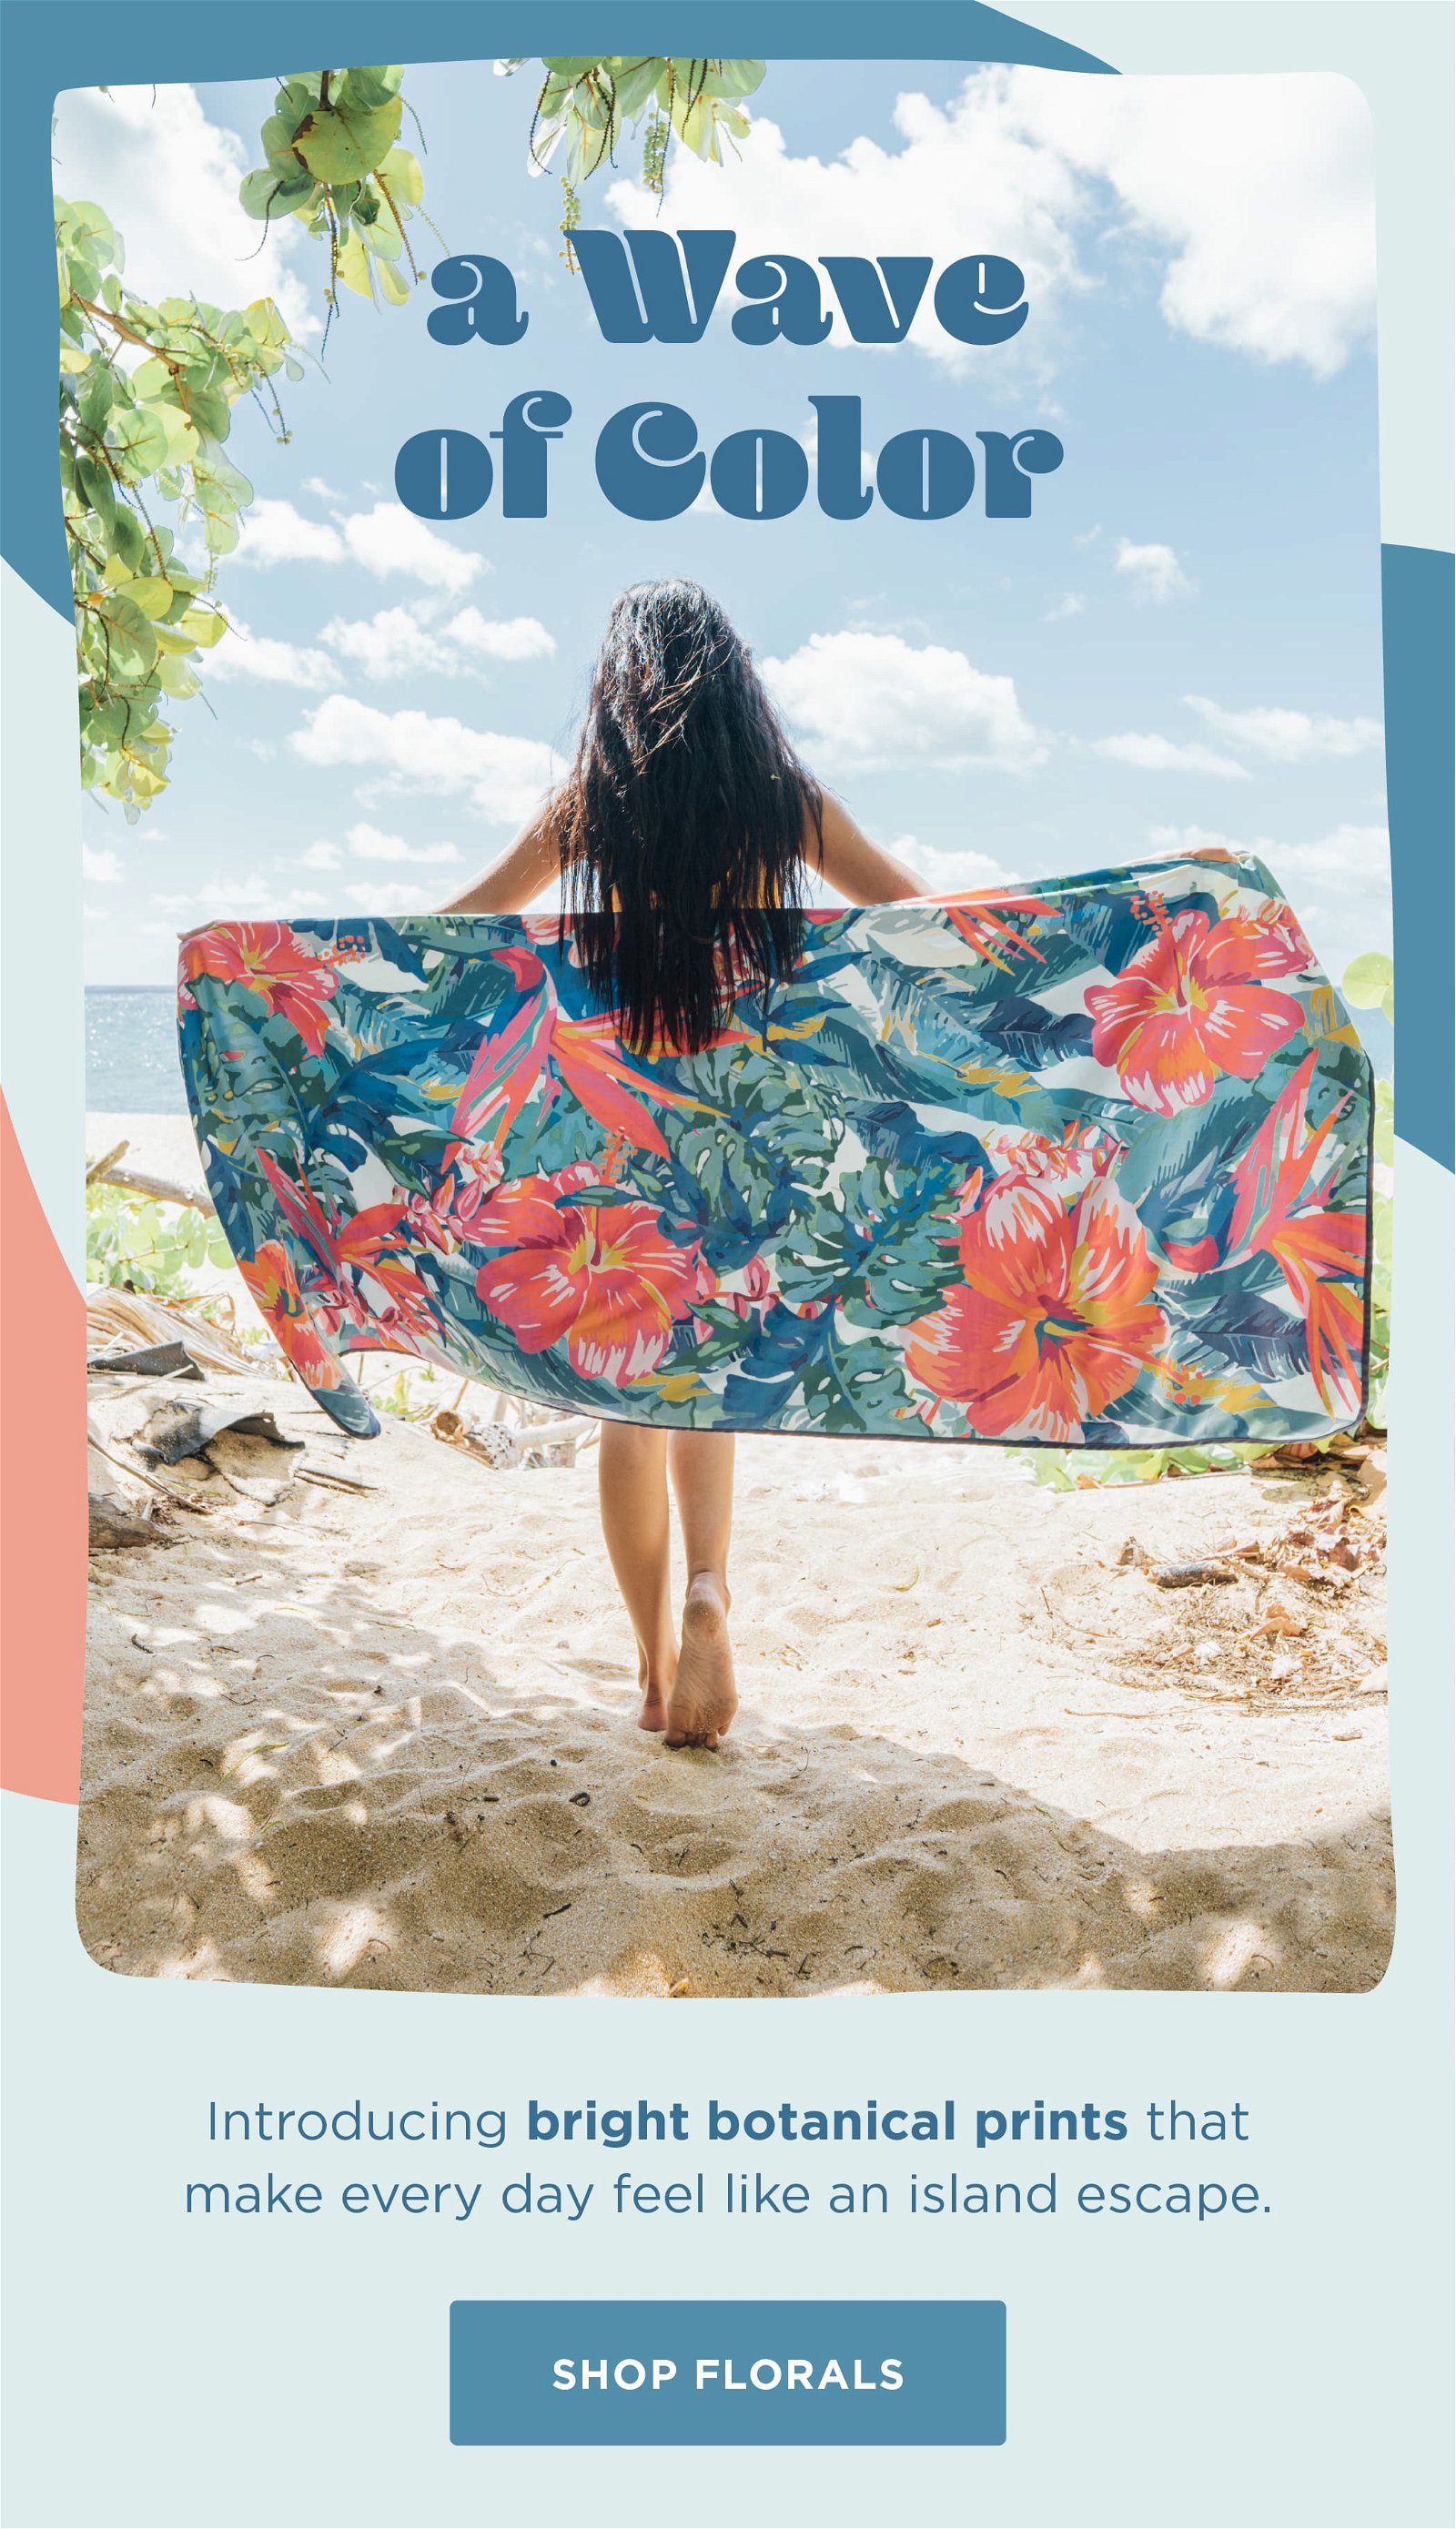 A wave of color - Introducing bright botanical prints that make every day feel like an island escape. SHOP FLORALS